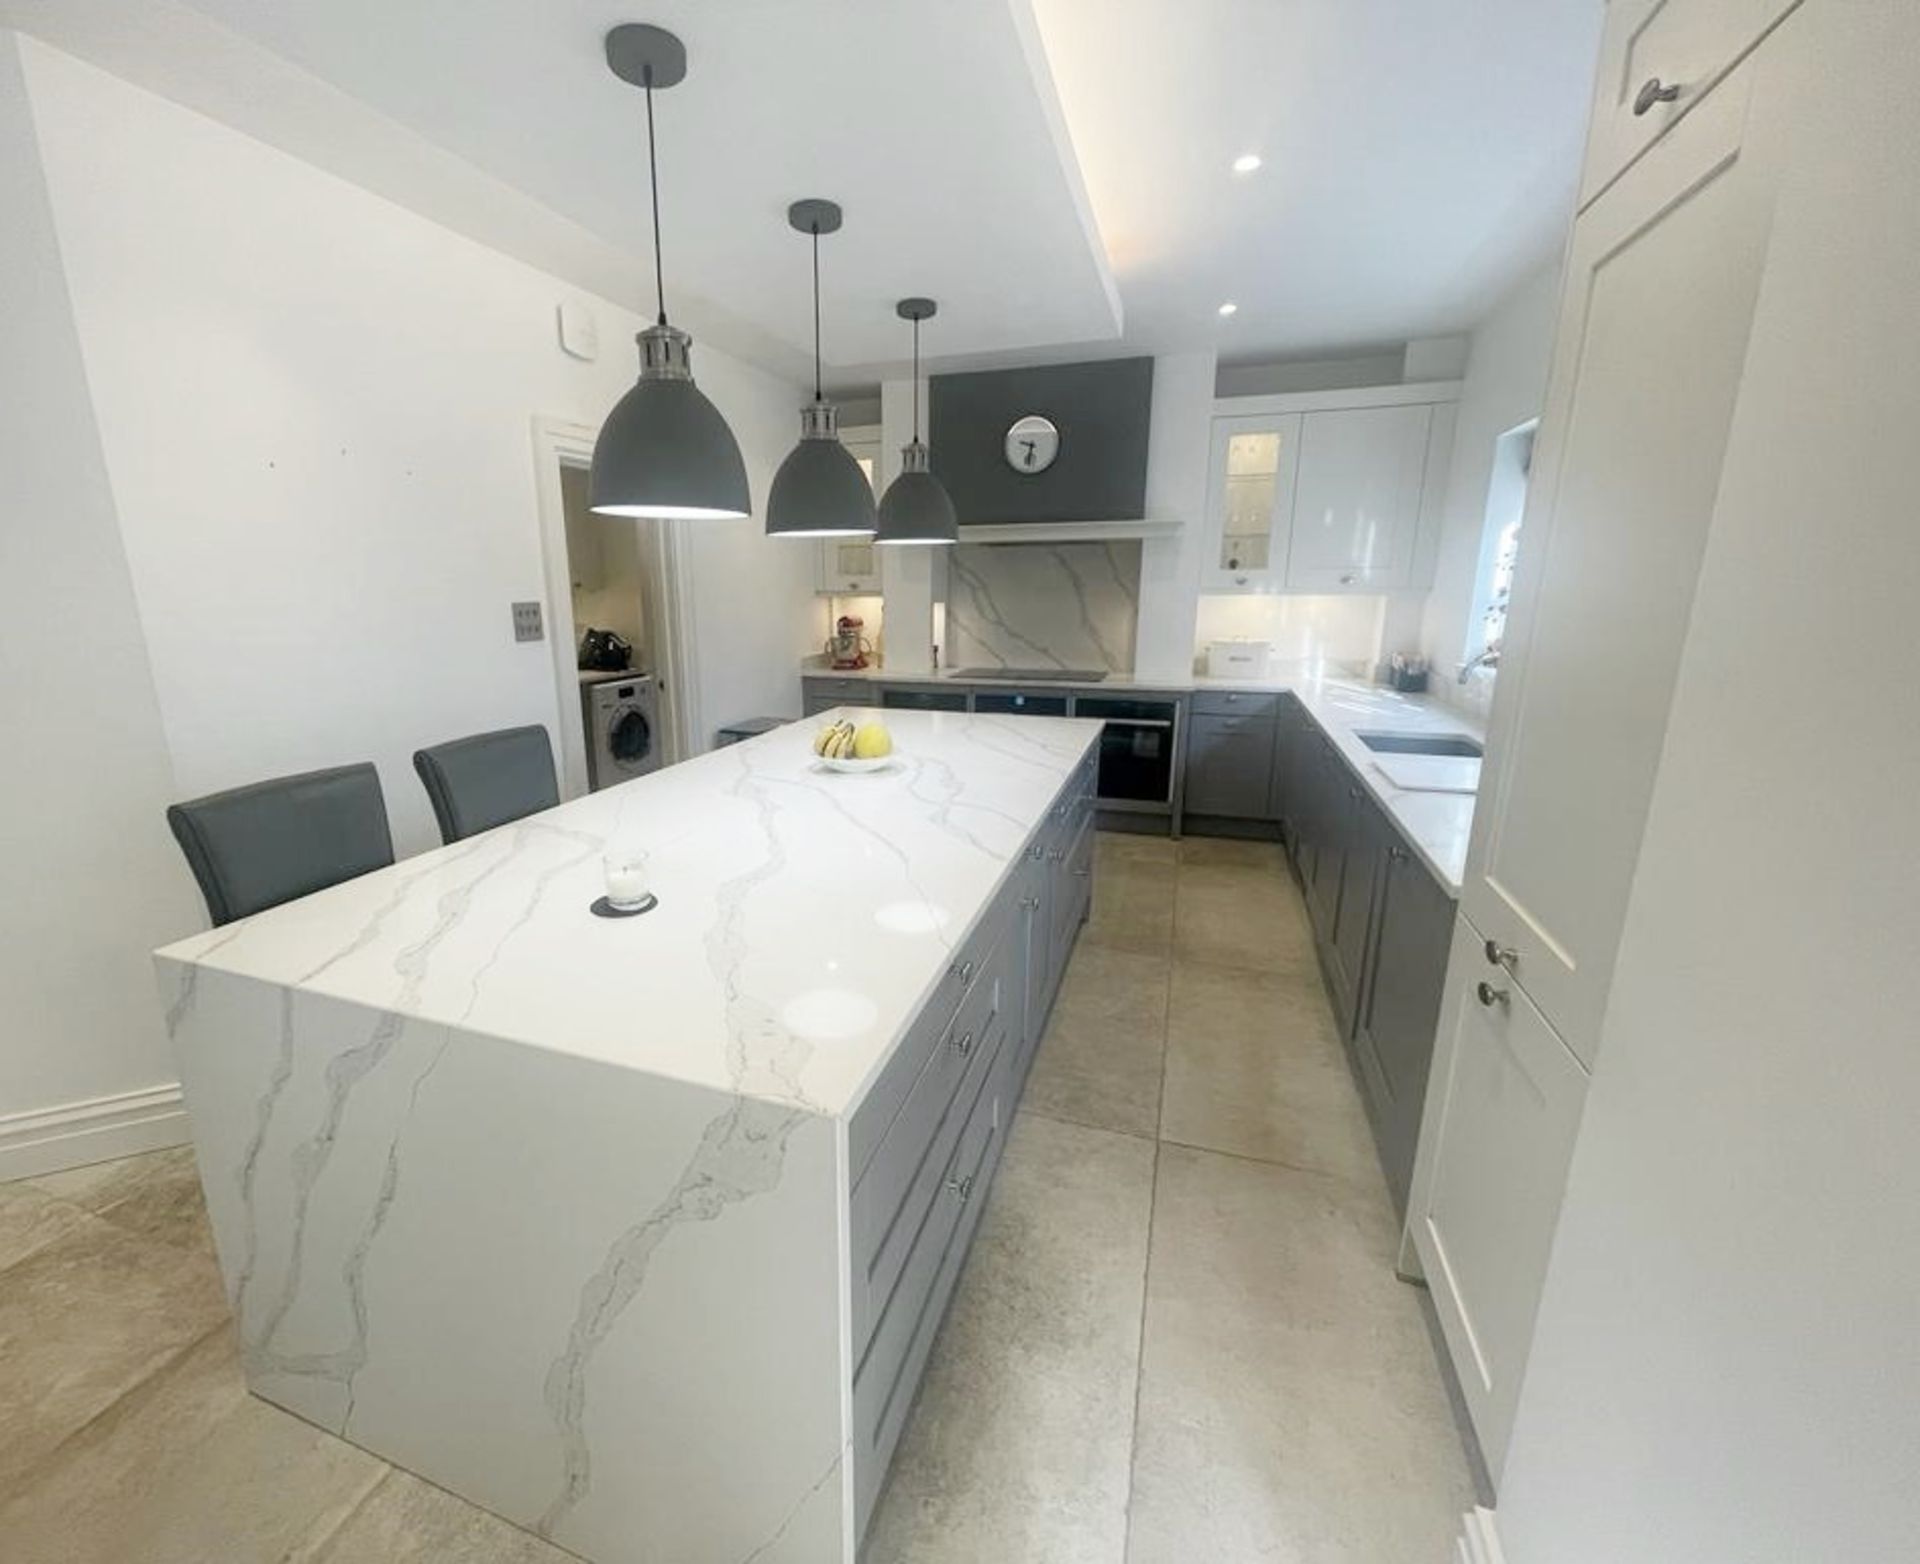 1 x SIEMATIC Bespoke Shaker-style Fitted Kitchen, Utility Room, Appliances & Modern Quartz Surfaces